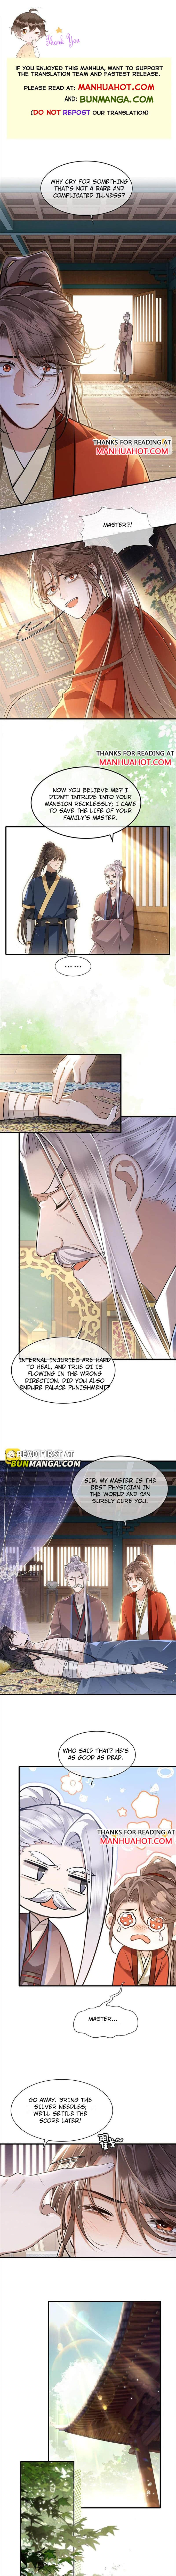 His Highness's Allure - Page 2